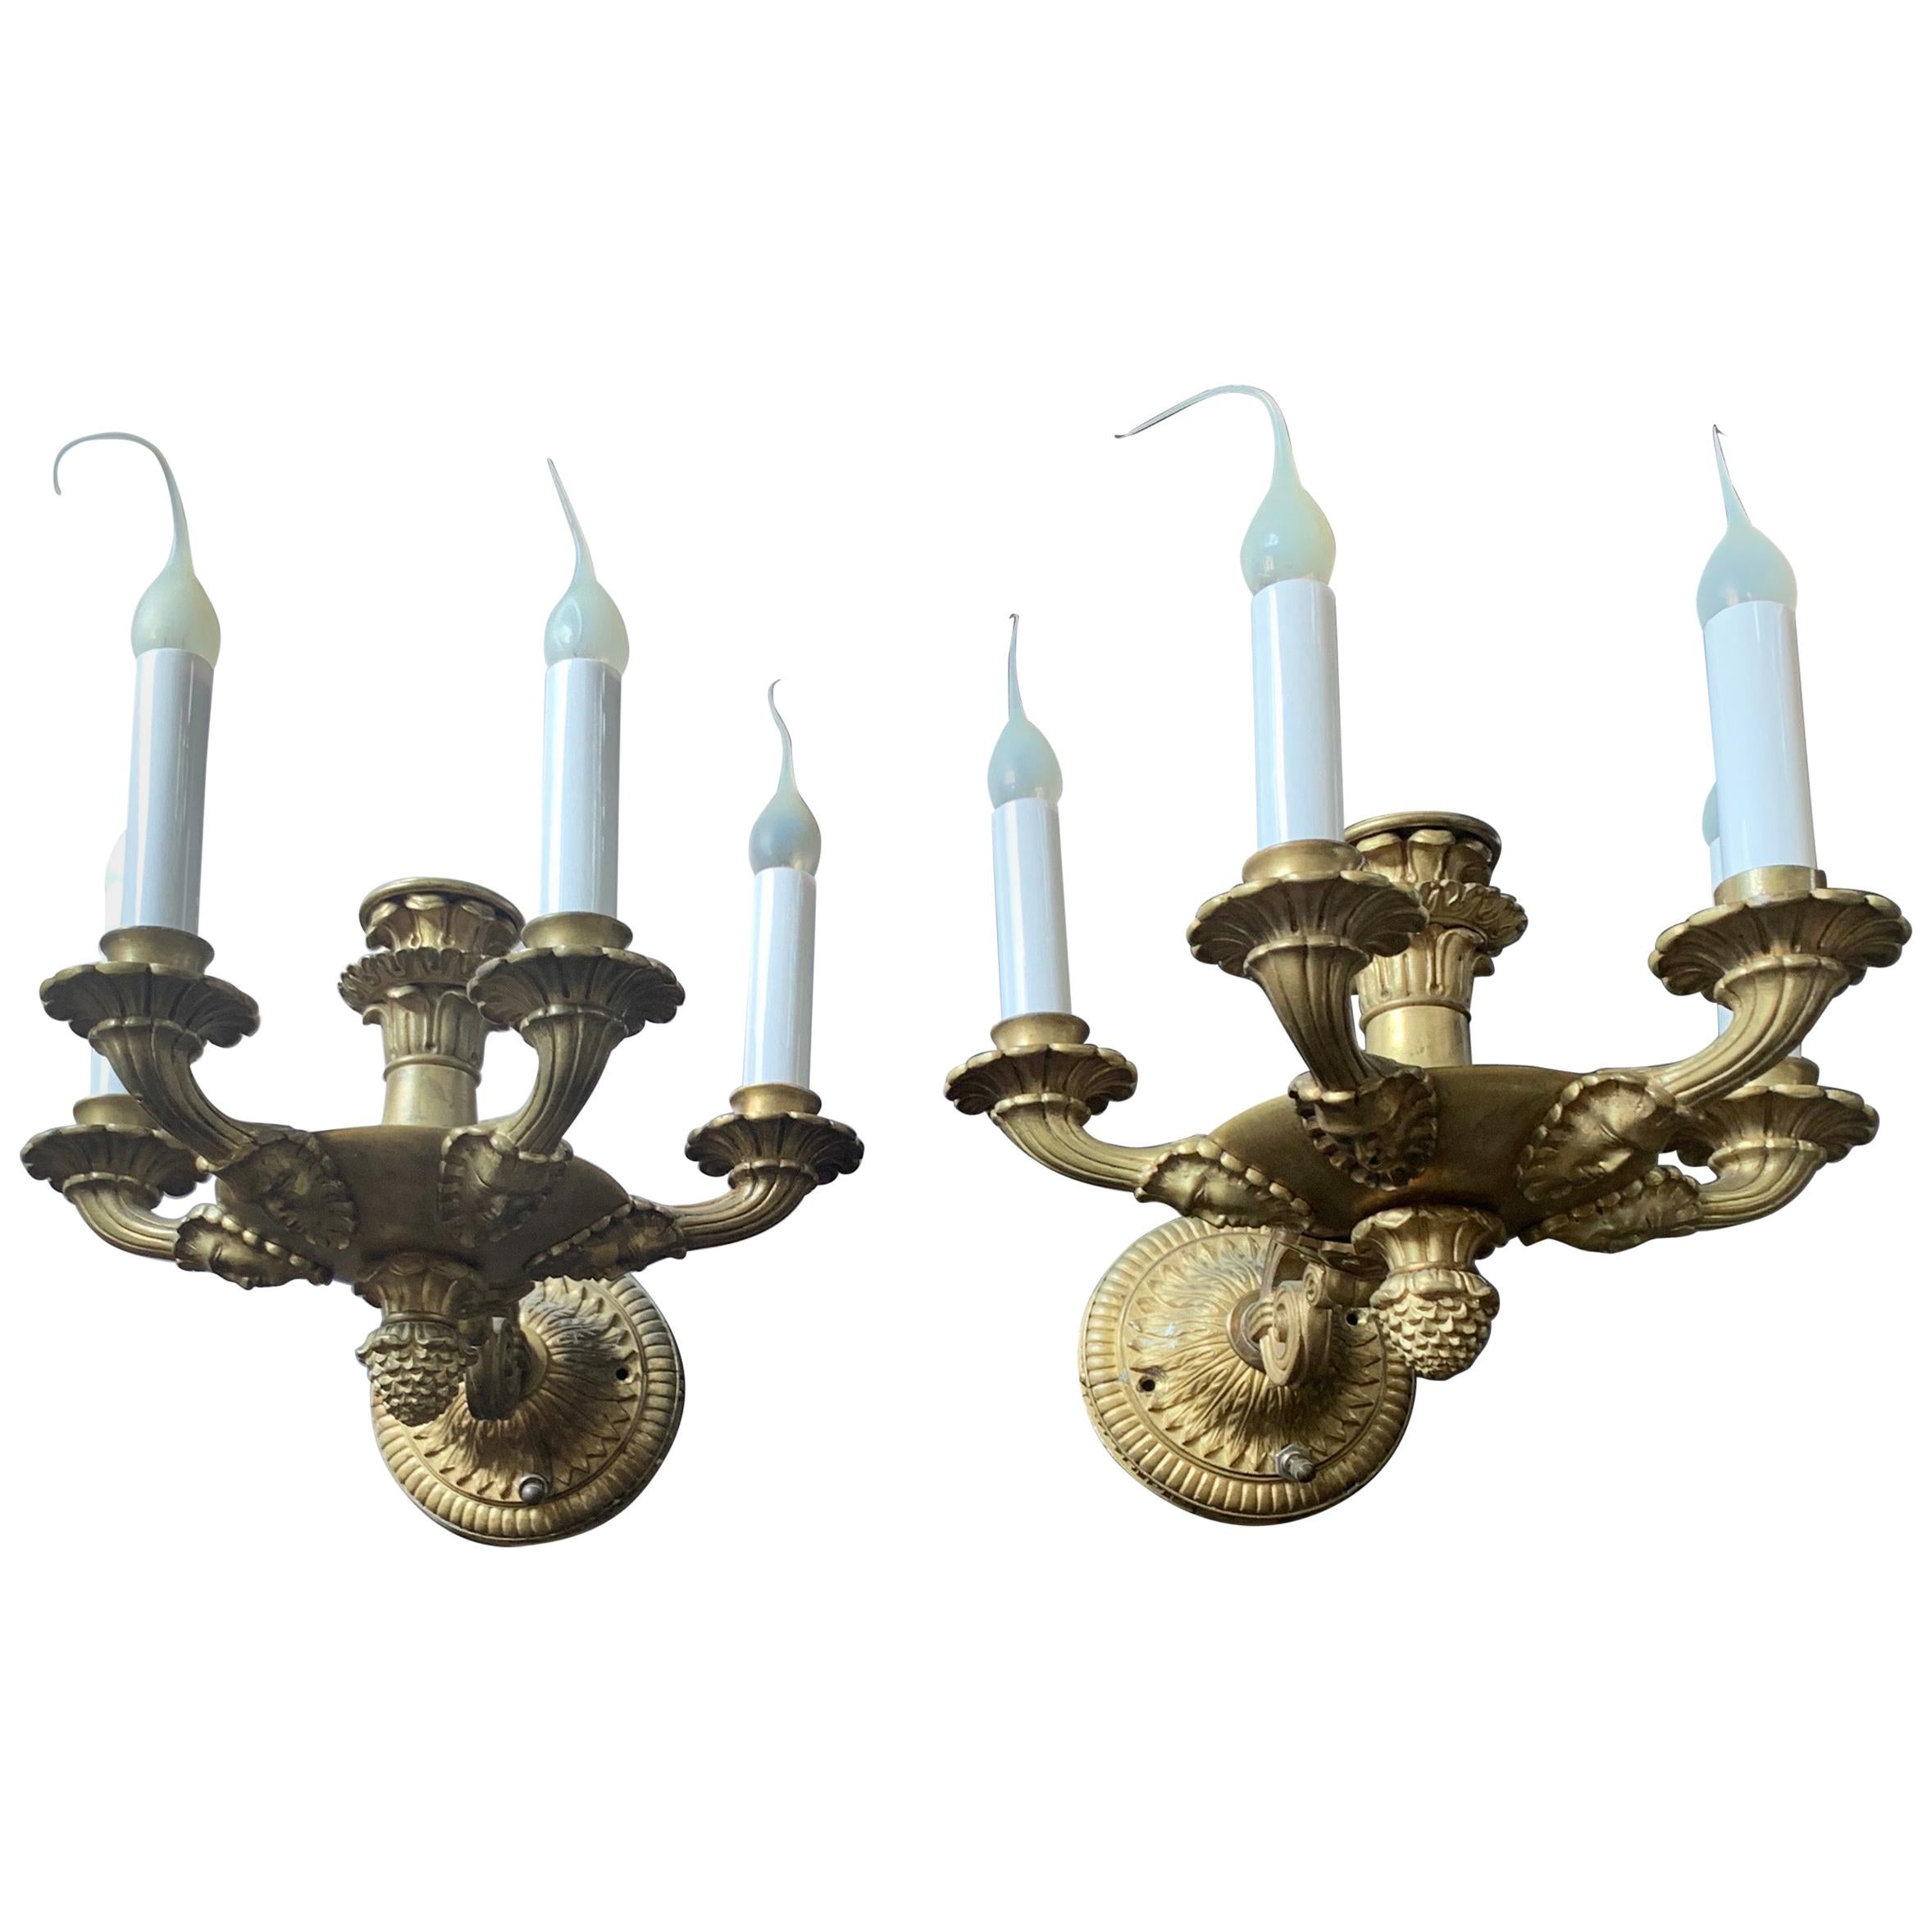 Wonderful Pair French Neoclassical Empire Bronze Figural 5-Arm Regency Sconces For Sale